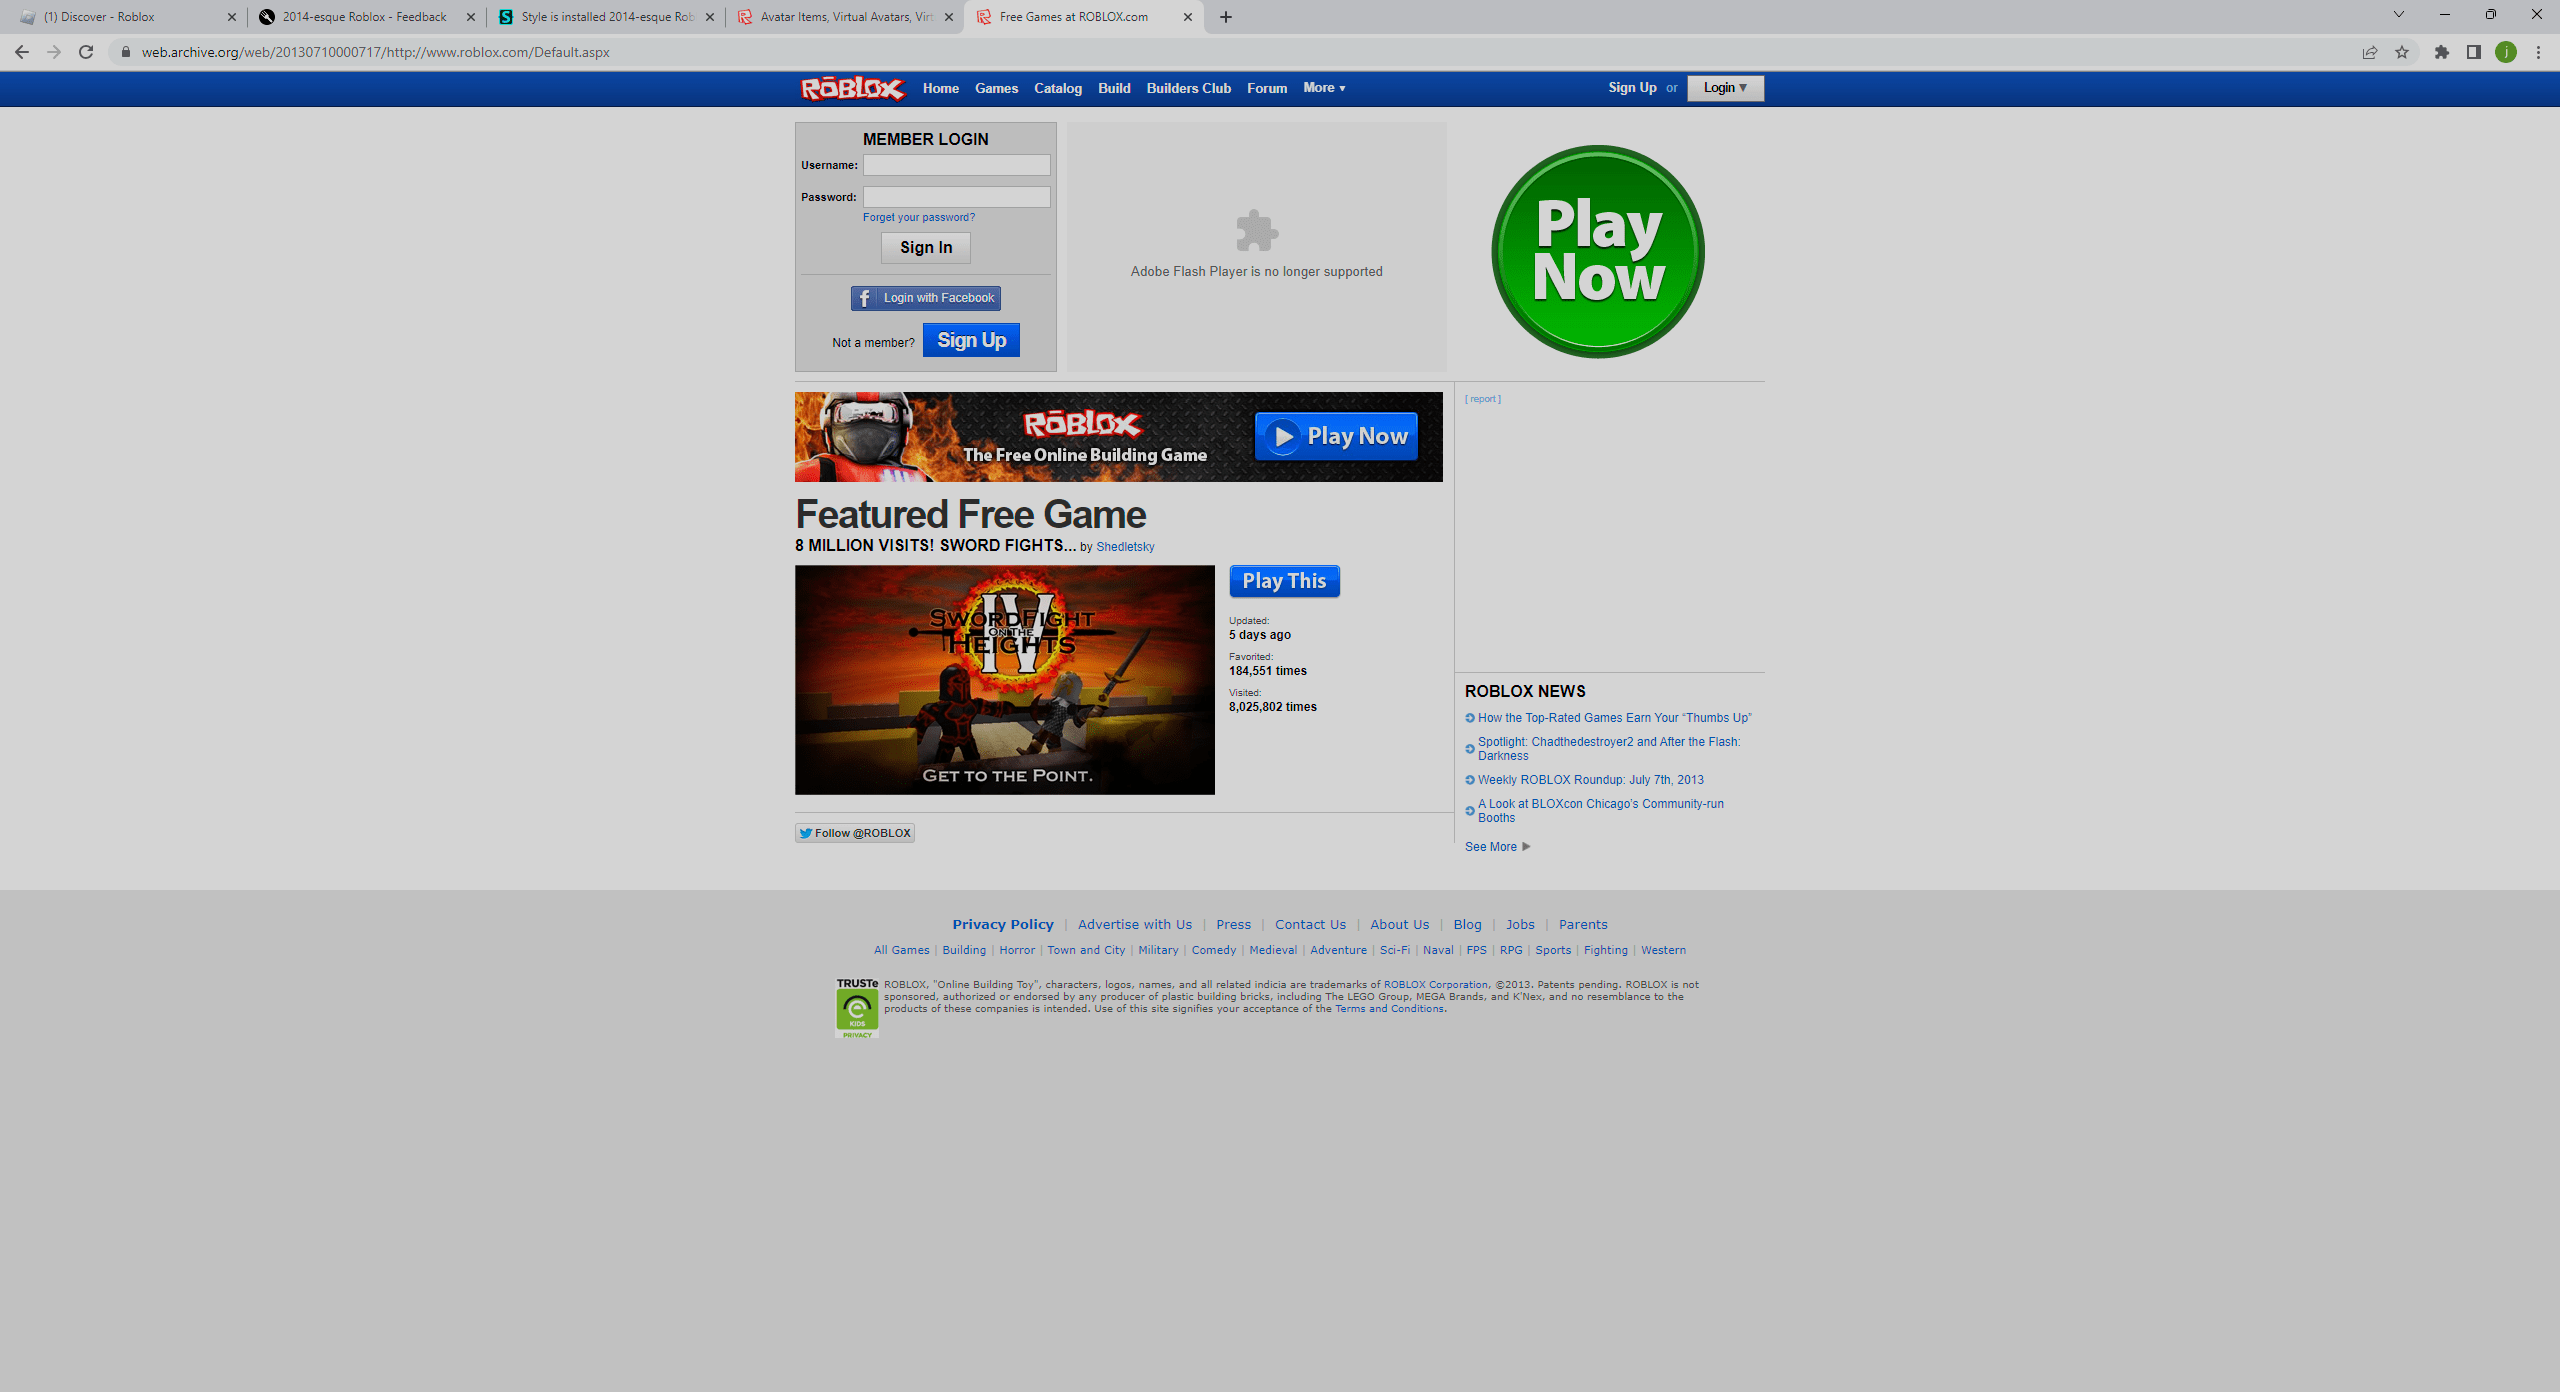 Roblox's Login Screen Gets A Rating Of 